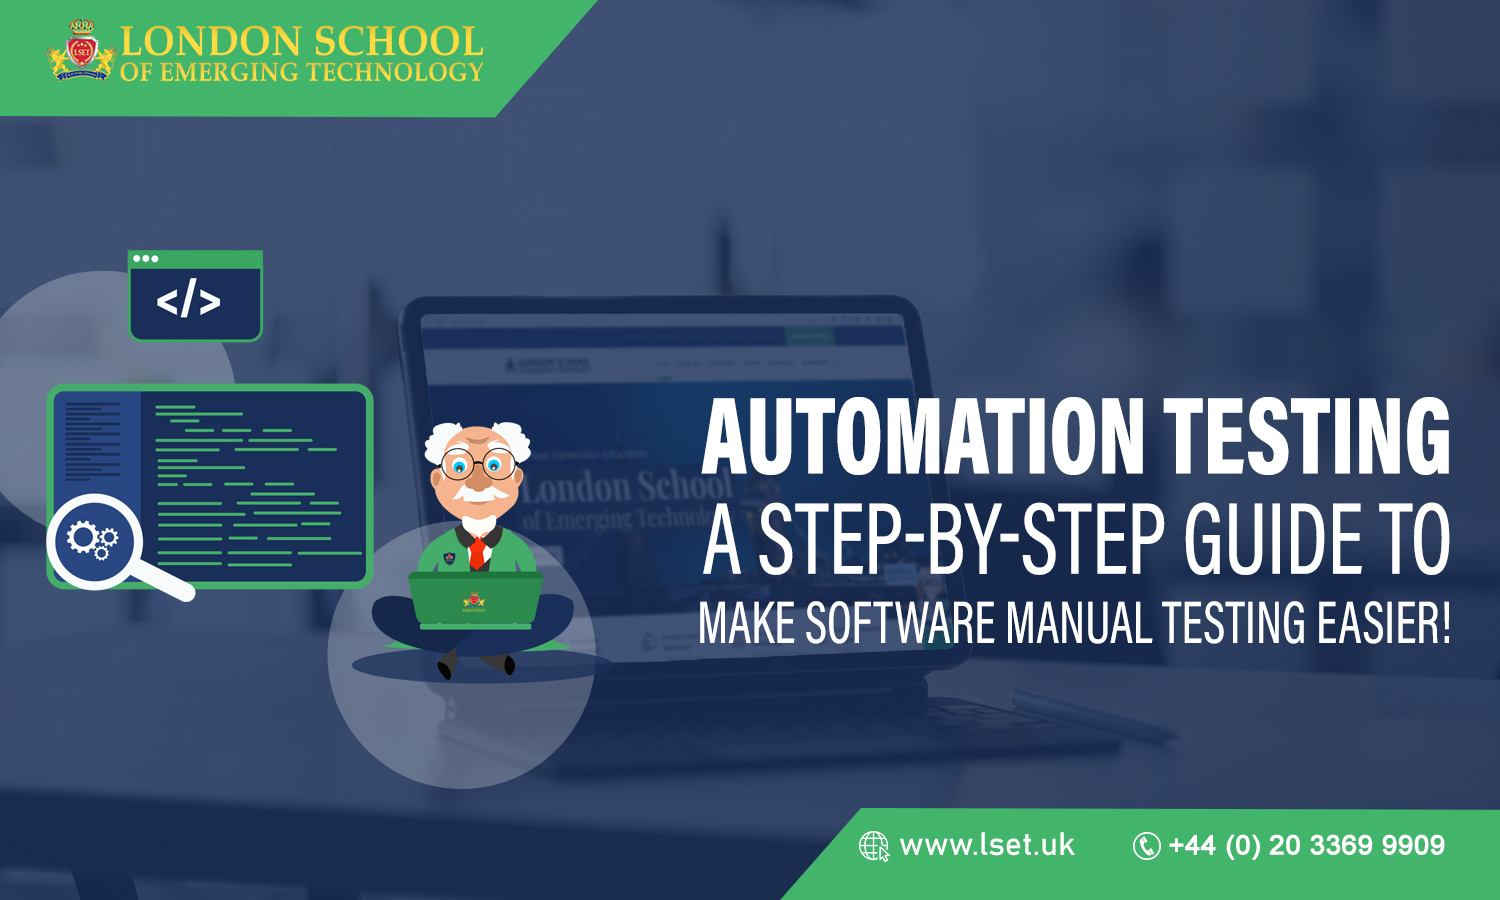 Automation Testing A Step-by-Step Guide to Make Software Manual Testing Easier!